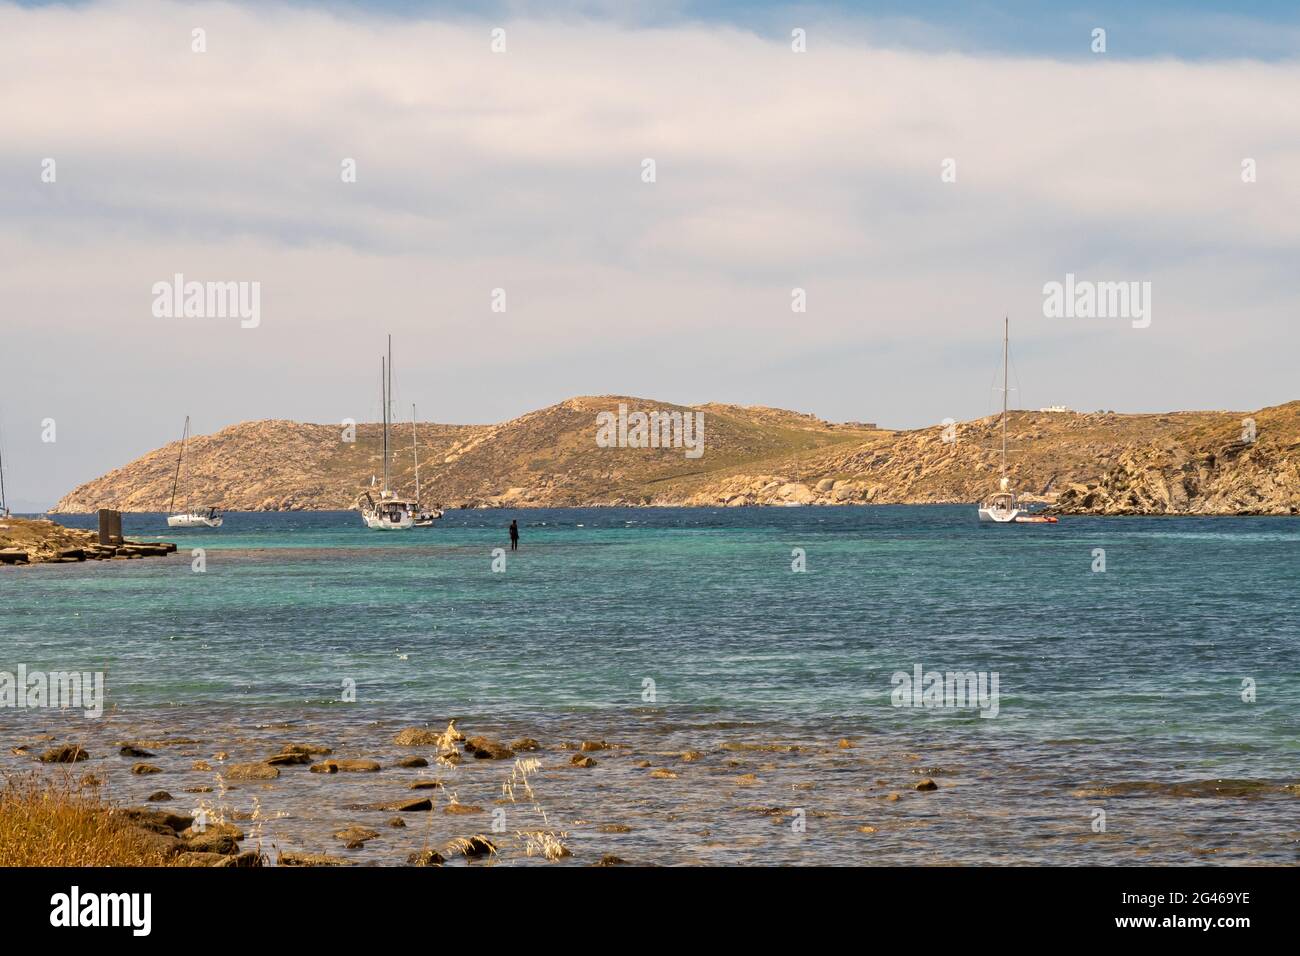 DELOS, Greece, 29/05/2019. Iron figures installed among ancient ruins on the island of Delos, Greece,  by artist Antony Gormley. Stock Photo